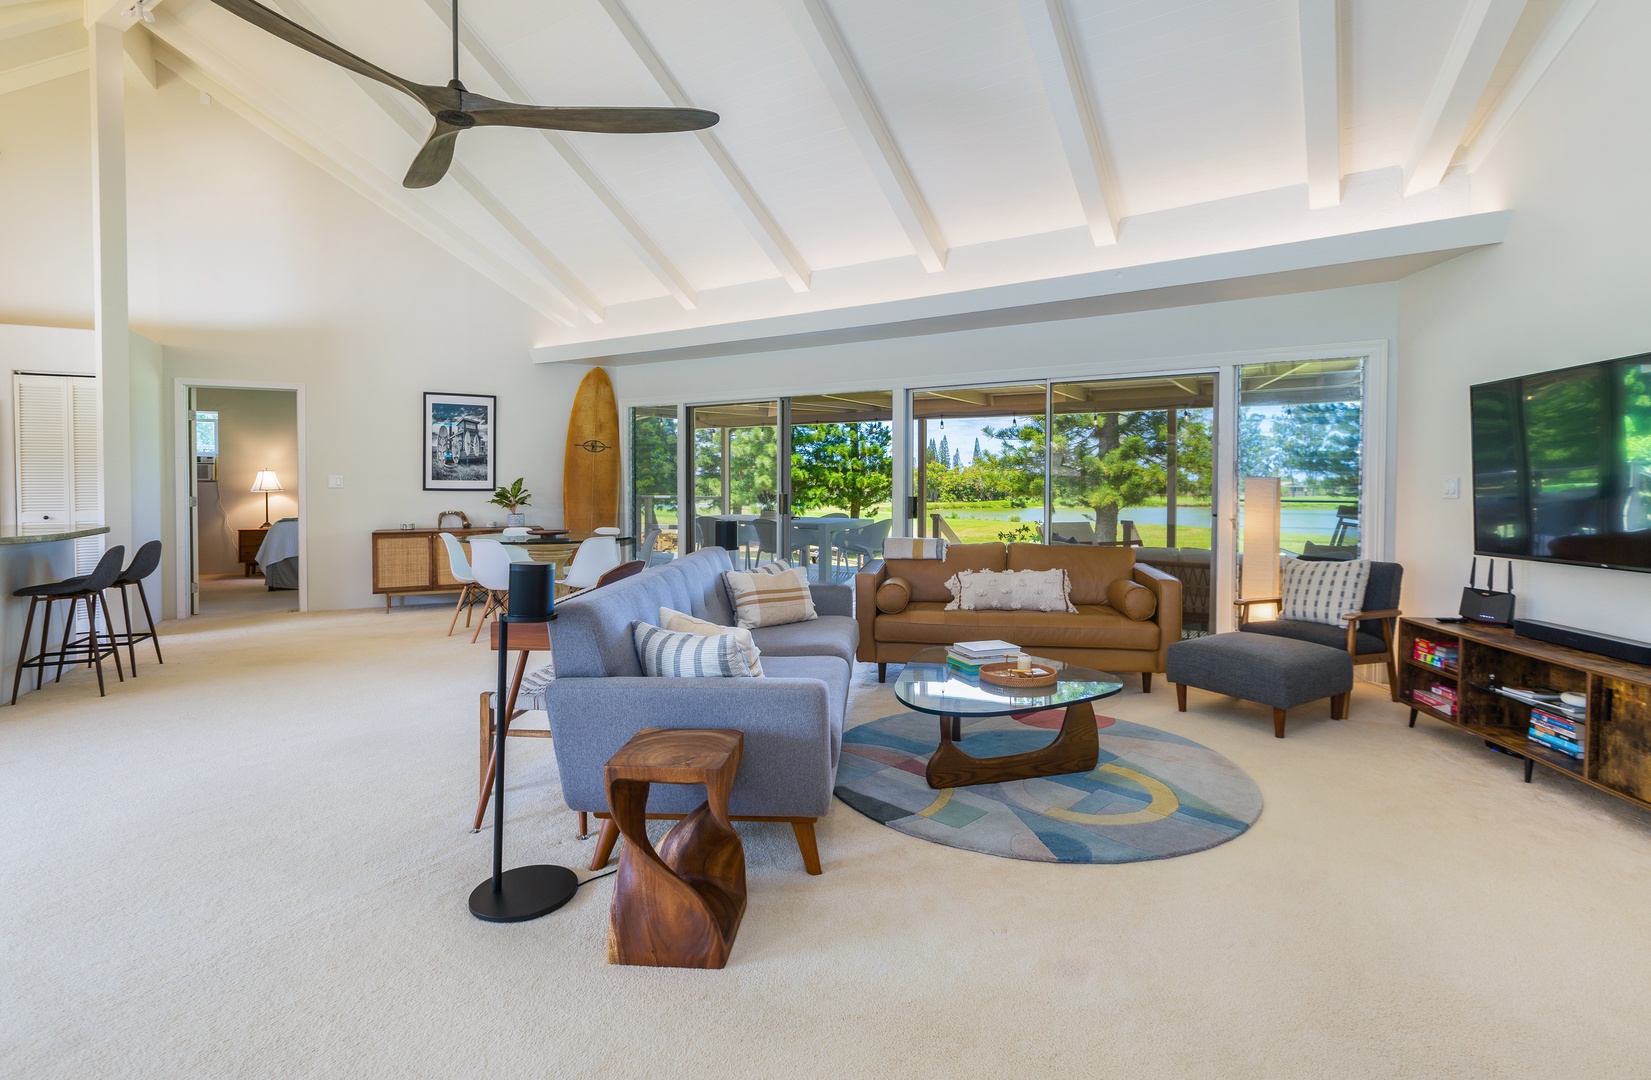 Princeville Vacation Rentals, Wai Puna - This 3 bedroom, 2 bath home sleeps up to 6 guests and is situated on a quiet cul de sac in the resort community of Princeville on the island of Kauai’s North Shore